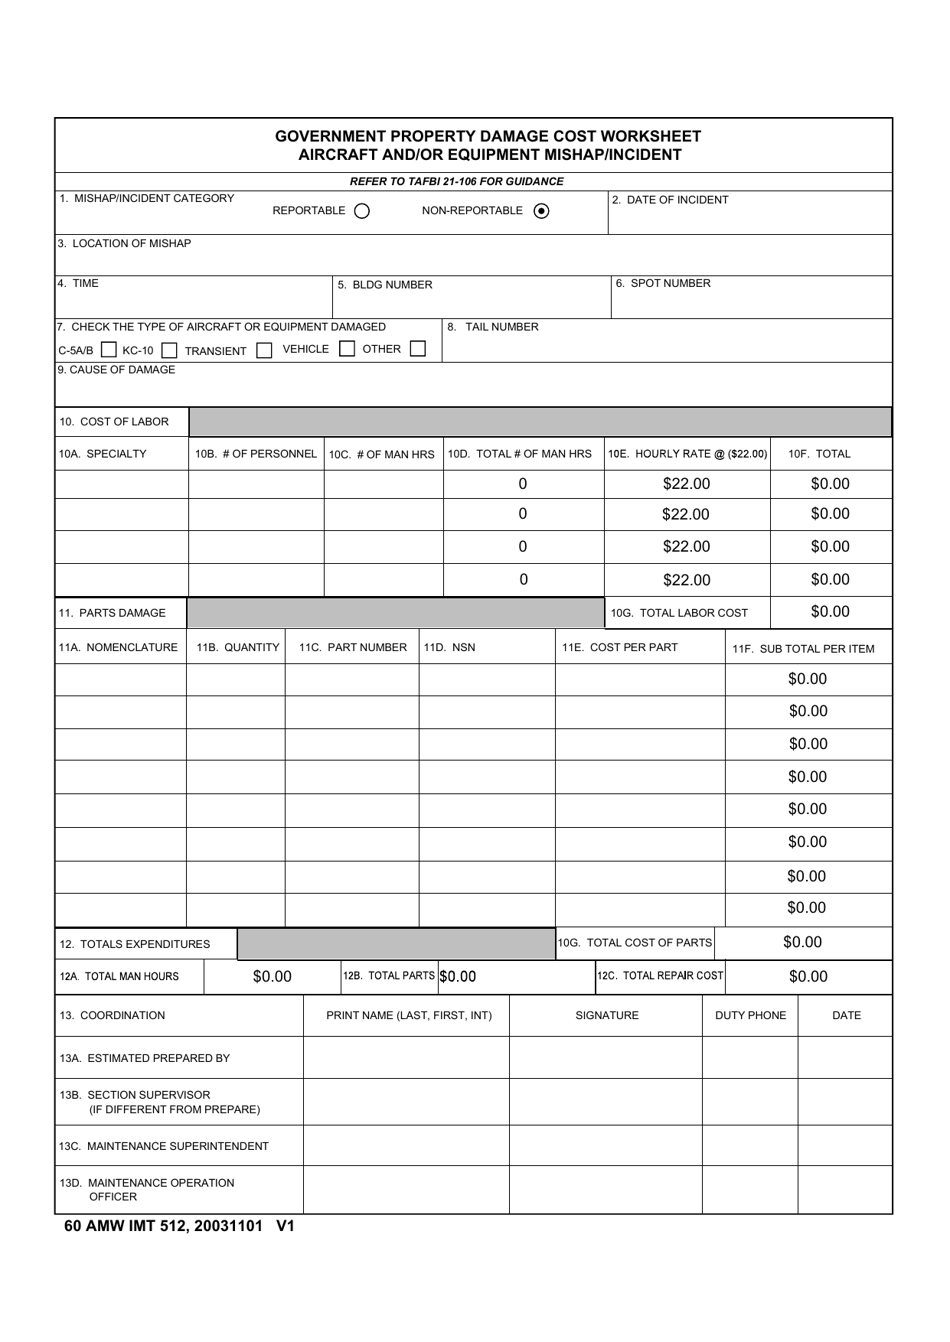 60 AMW IMT Form 512 Government Property Damage / Cost Worksheet Aircraft and / or Equipment Mishap / Incident, Page 1